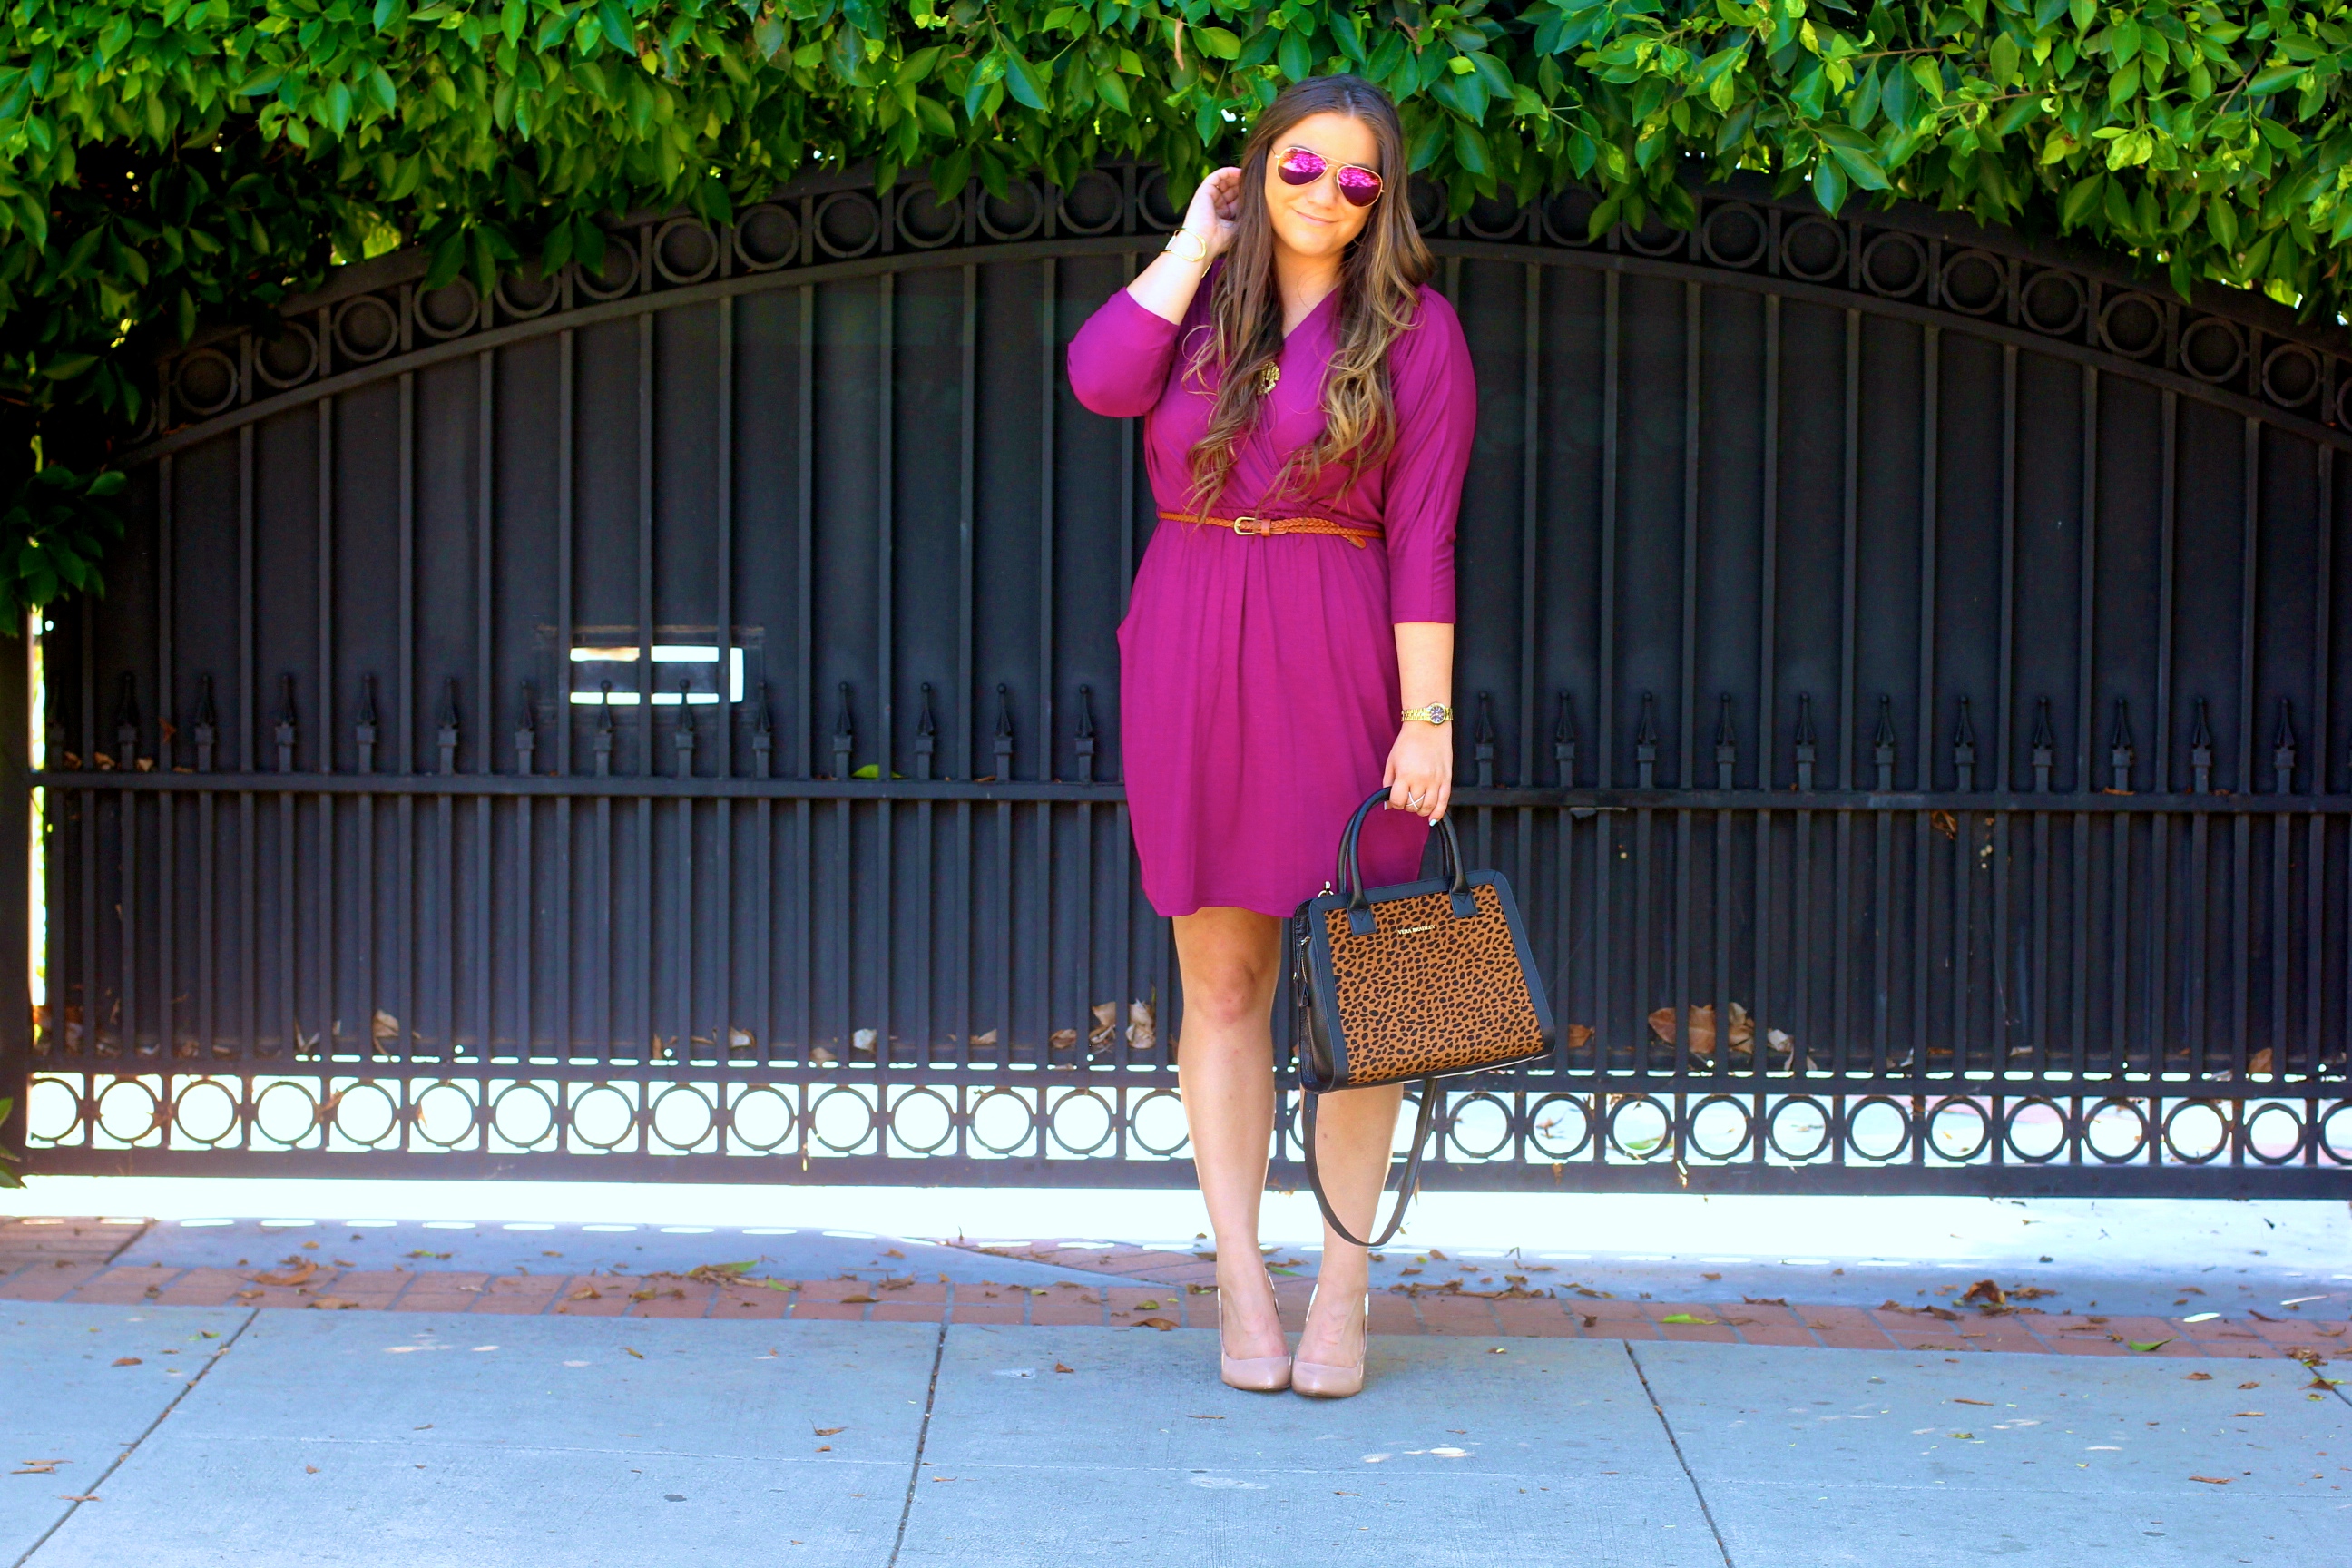 missyonmadison, melissa tierney, fashion blog, fashion blogger, style blog, style blogger, shoot the moon la, violet wrap dress, plum wrap dress, vera bradley, vera bradley leopard satchel, leopard satchel, nude pumps, nude pointed toe pumps, dsw, mirrored aviators, red aviators, baublebar monogram necklace, wrap dress, long sleeve wrap dress, holiday style, what to wear for the holidays, how to dress for work, la blogger, violet wrap dress,